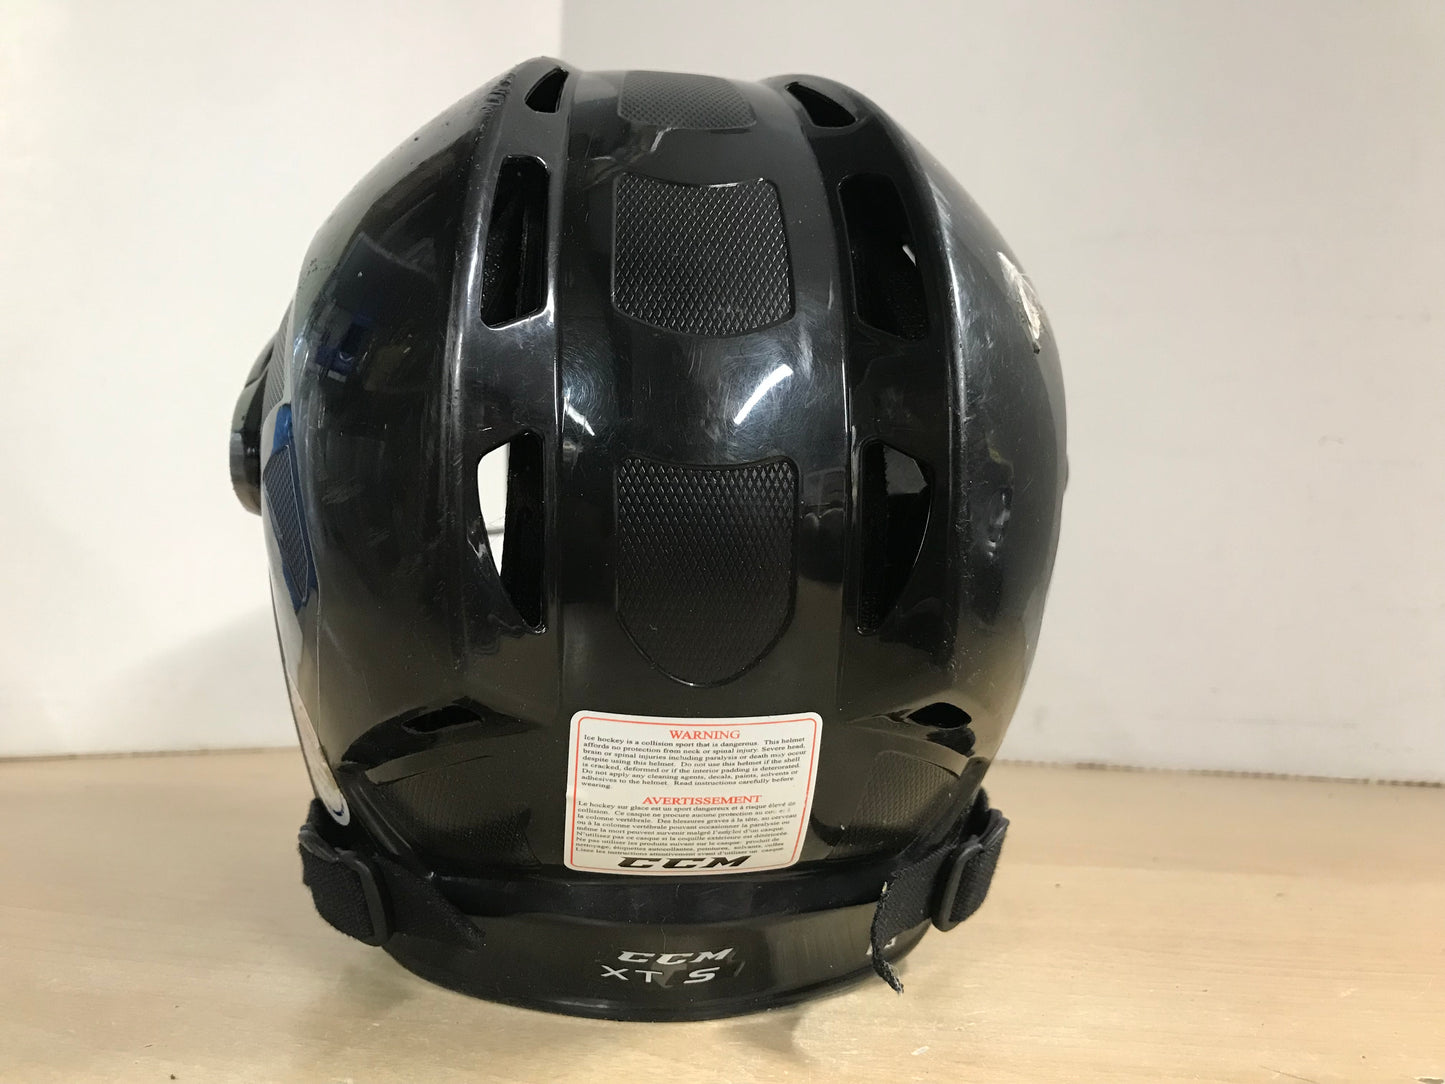 Hockey Helmet Child Size Small Age 4-6 CCM Black With Cage Expires Jan 2023